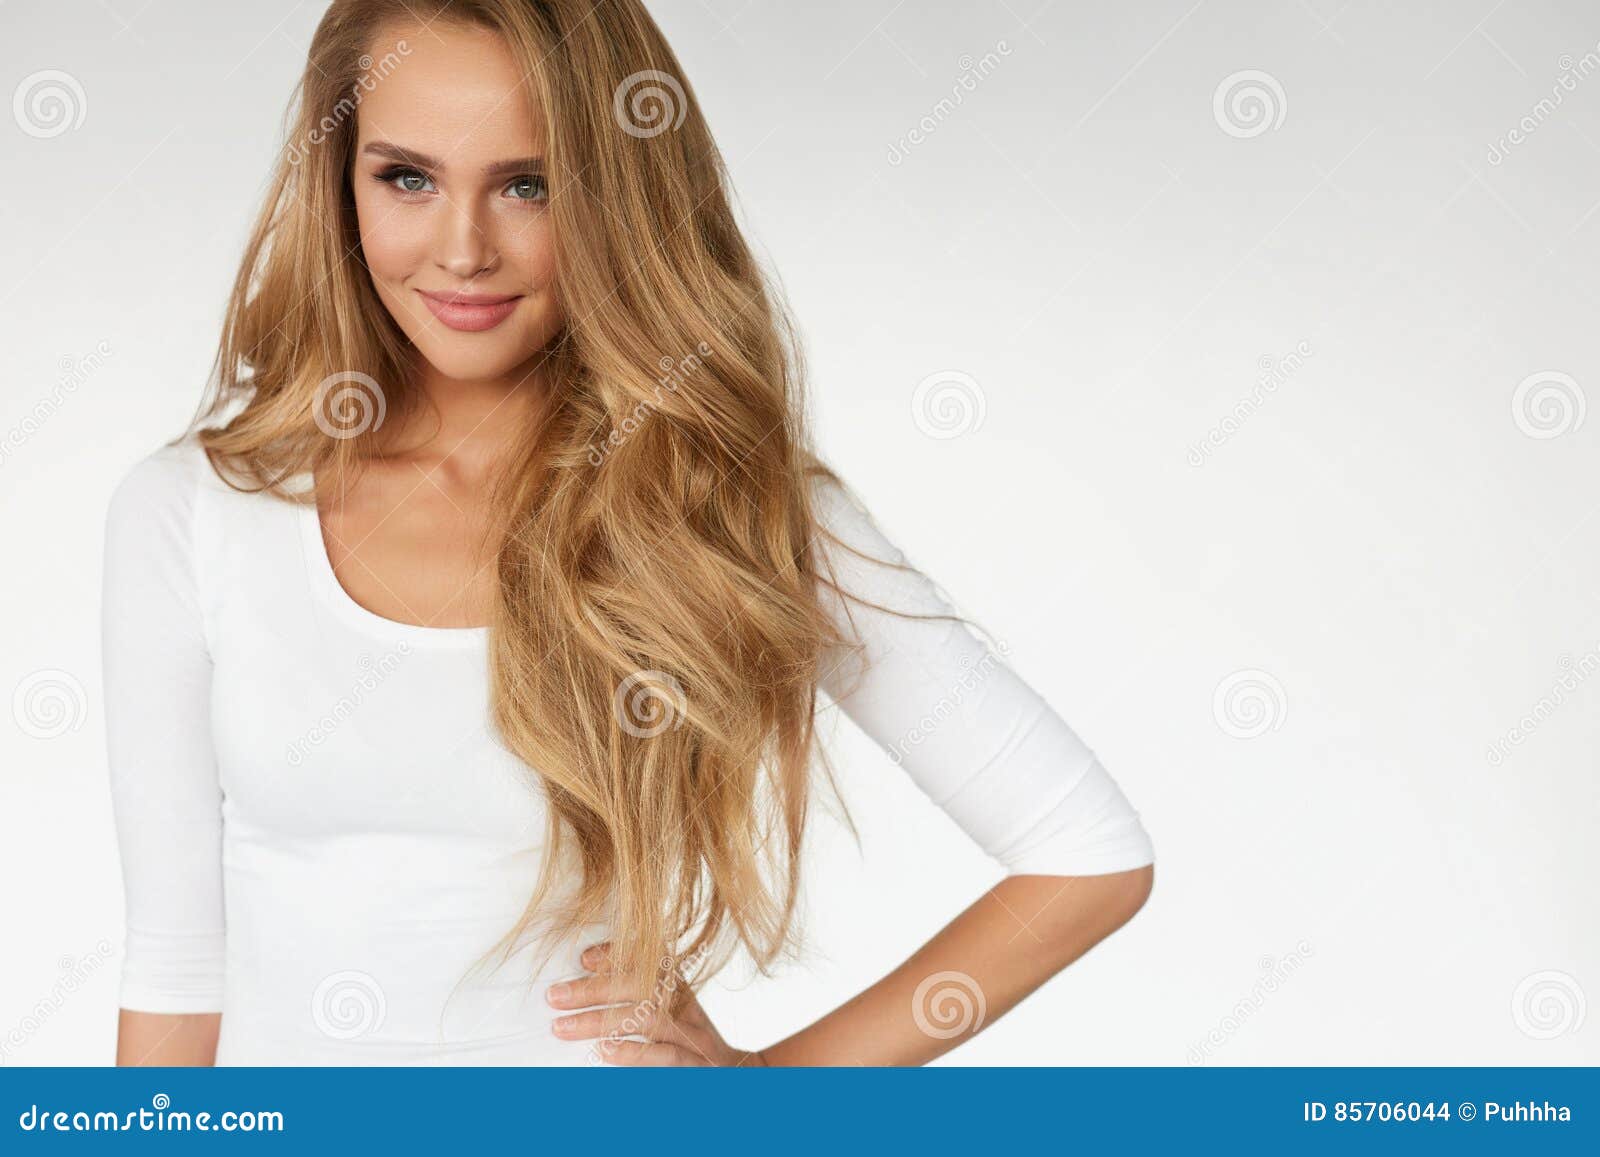 Beauty. Woman Model with Beautiful Long Blonde Hair Stock Photo - Image of  body, long: 85706044